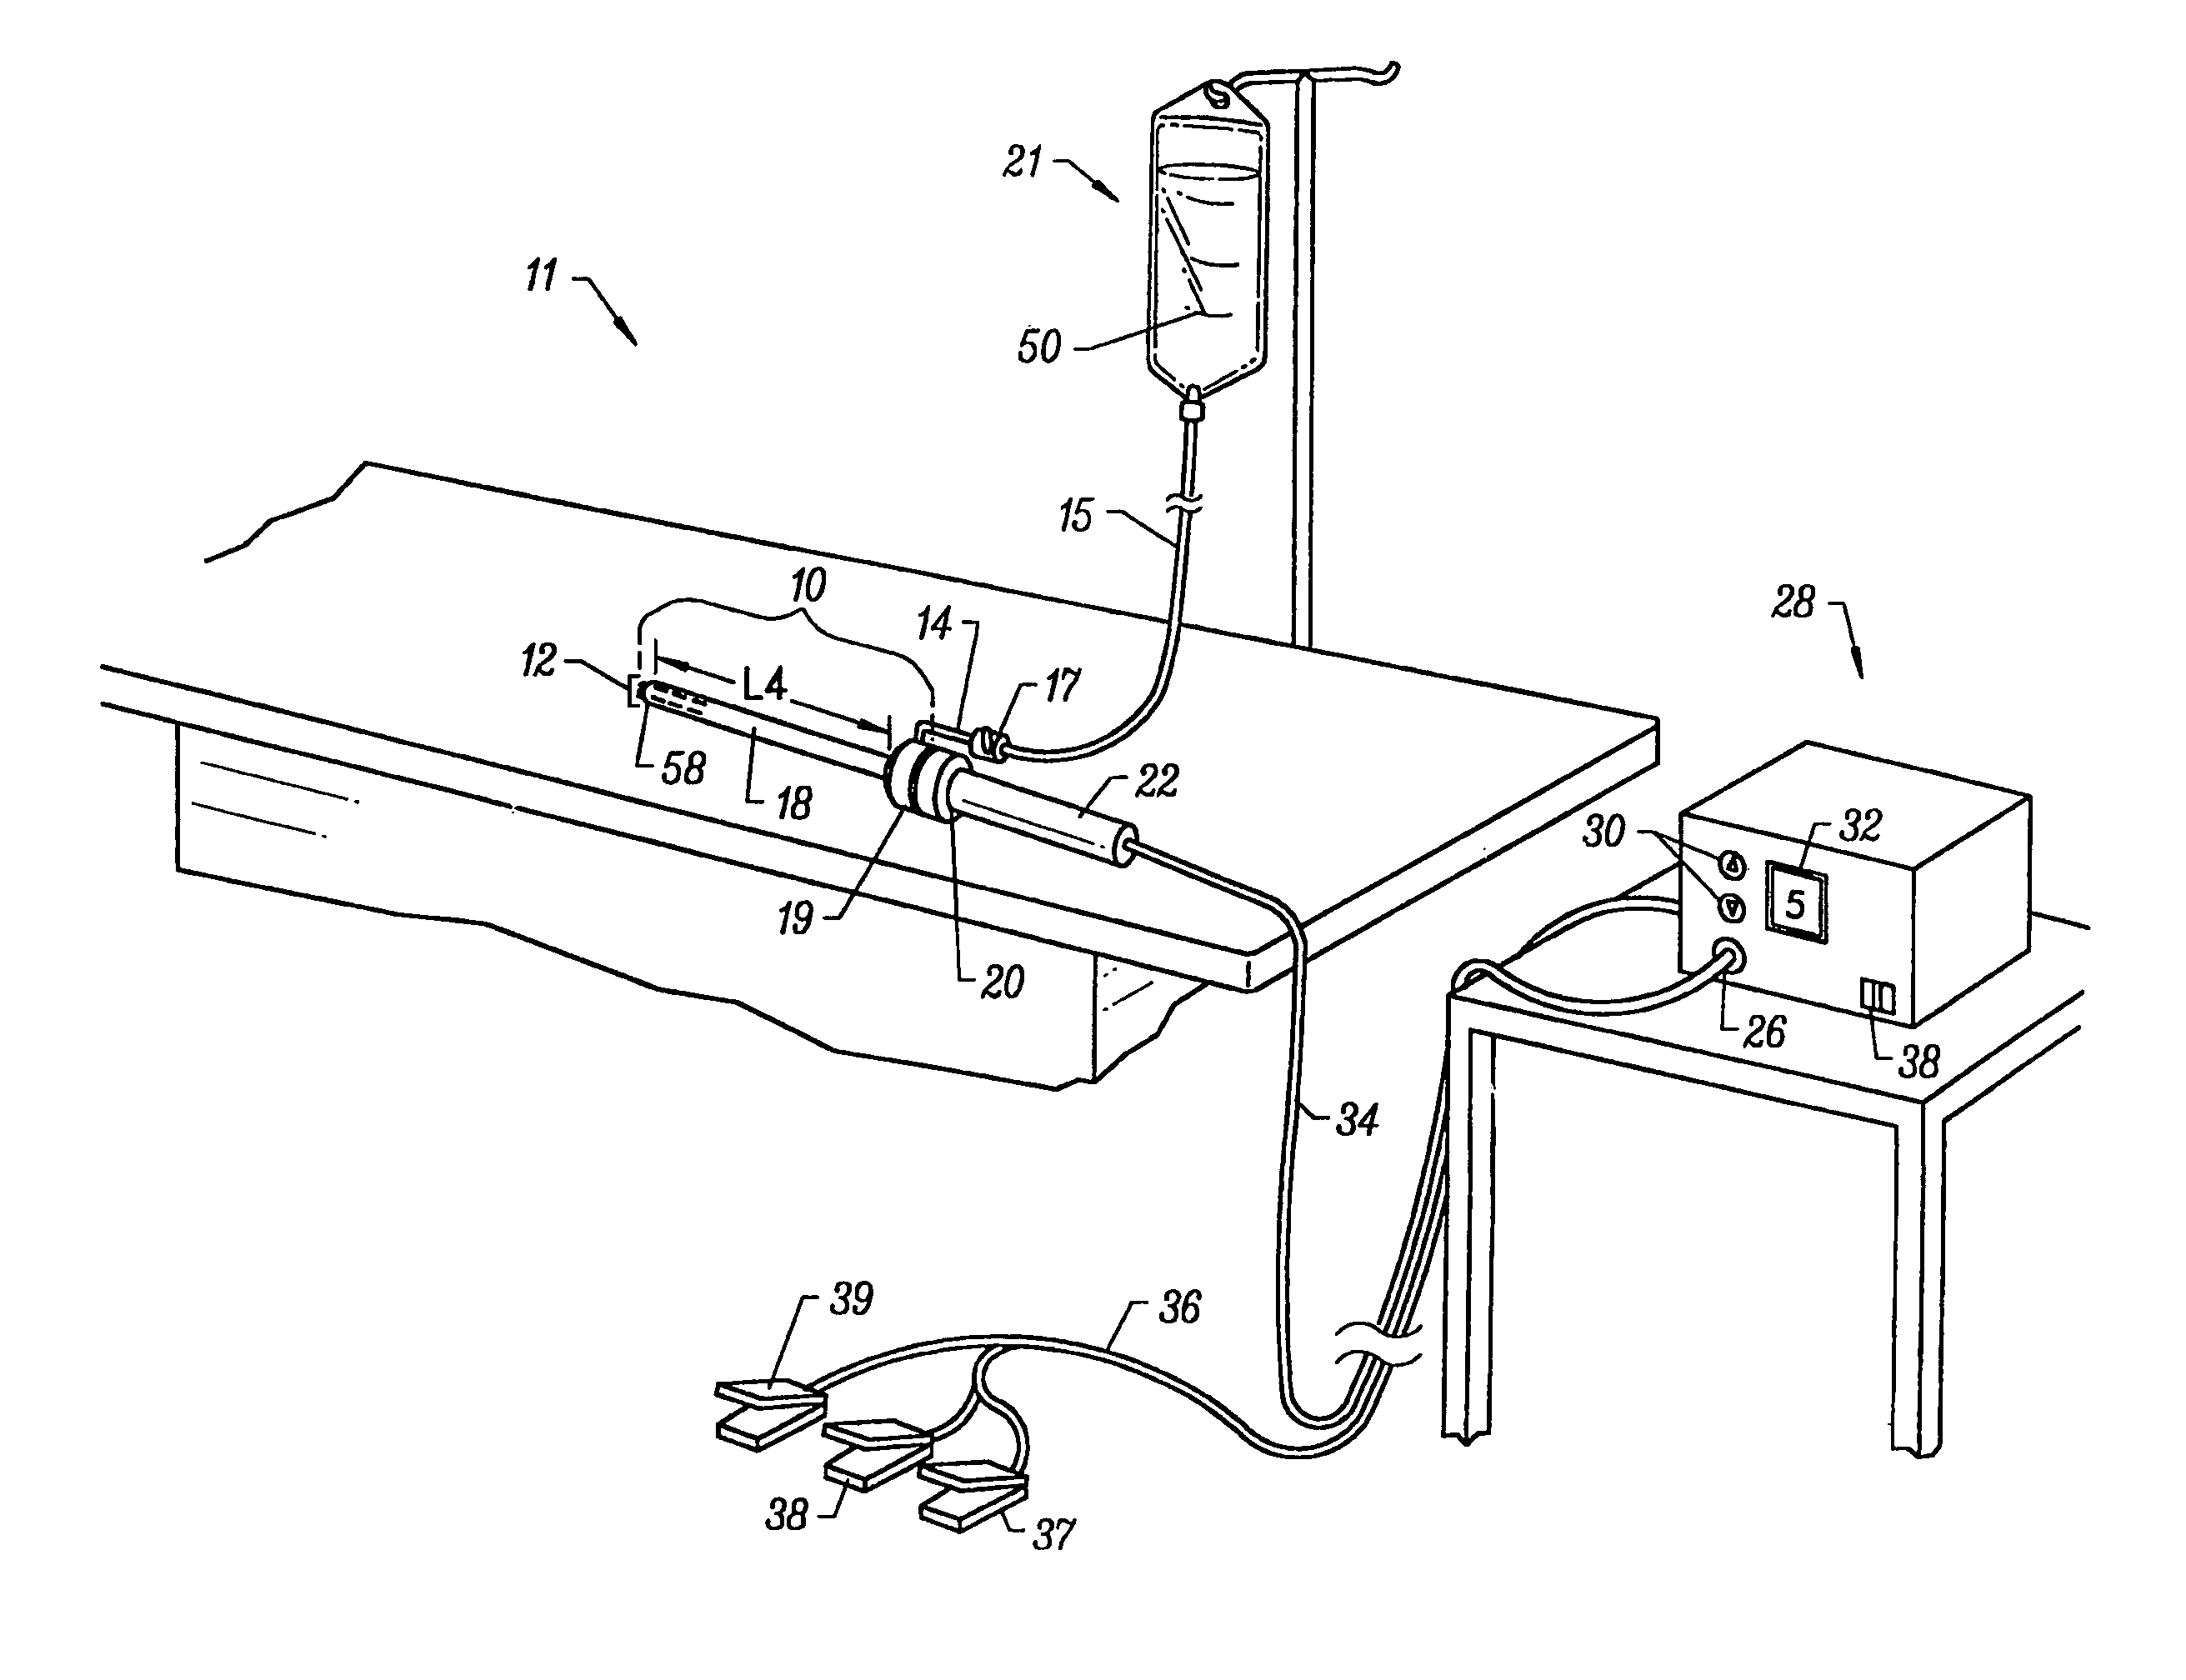 Systems and methods for electrosurgical treatment of obstructive sleep disorders